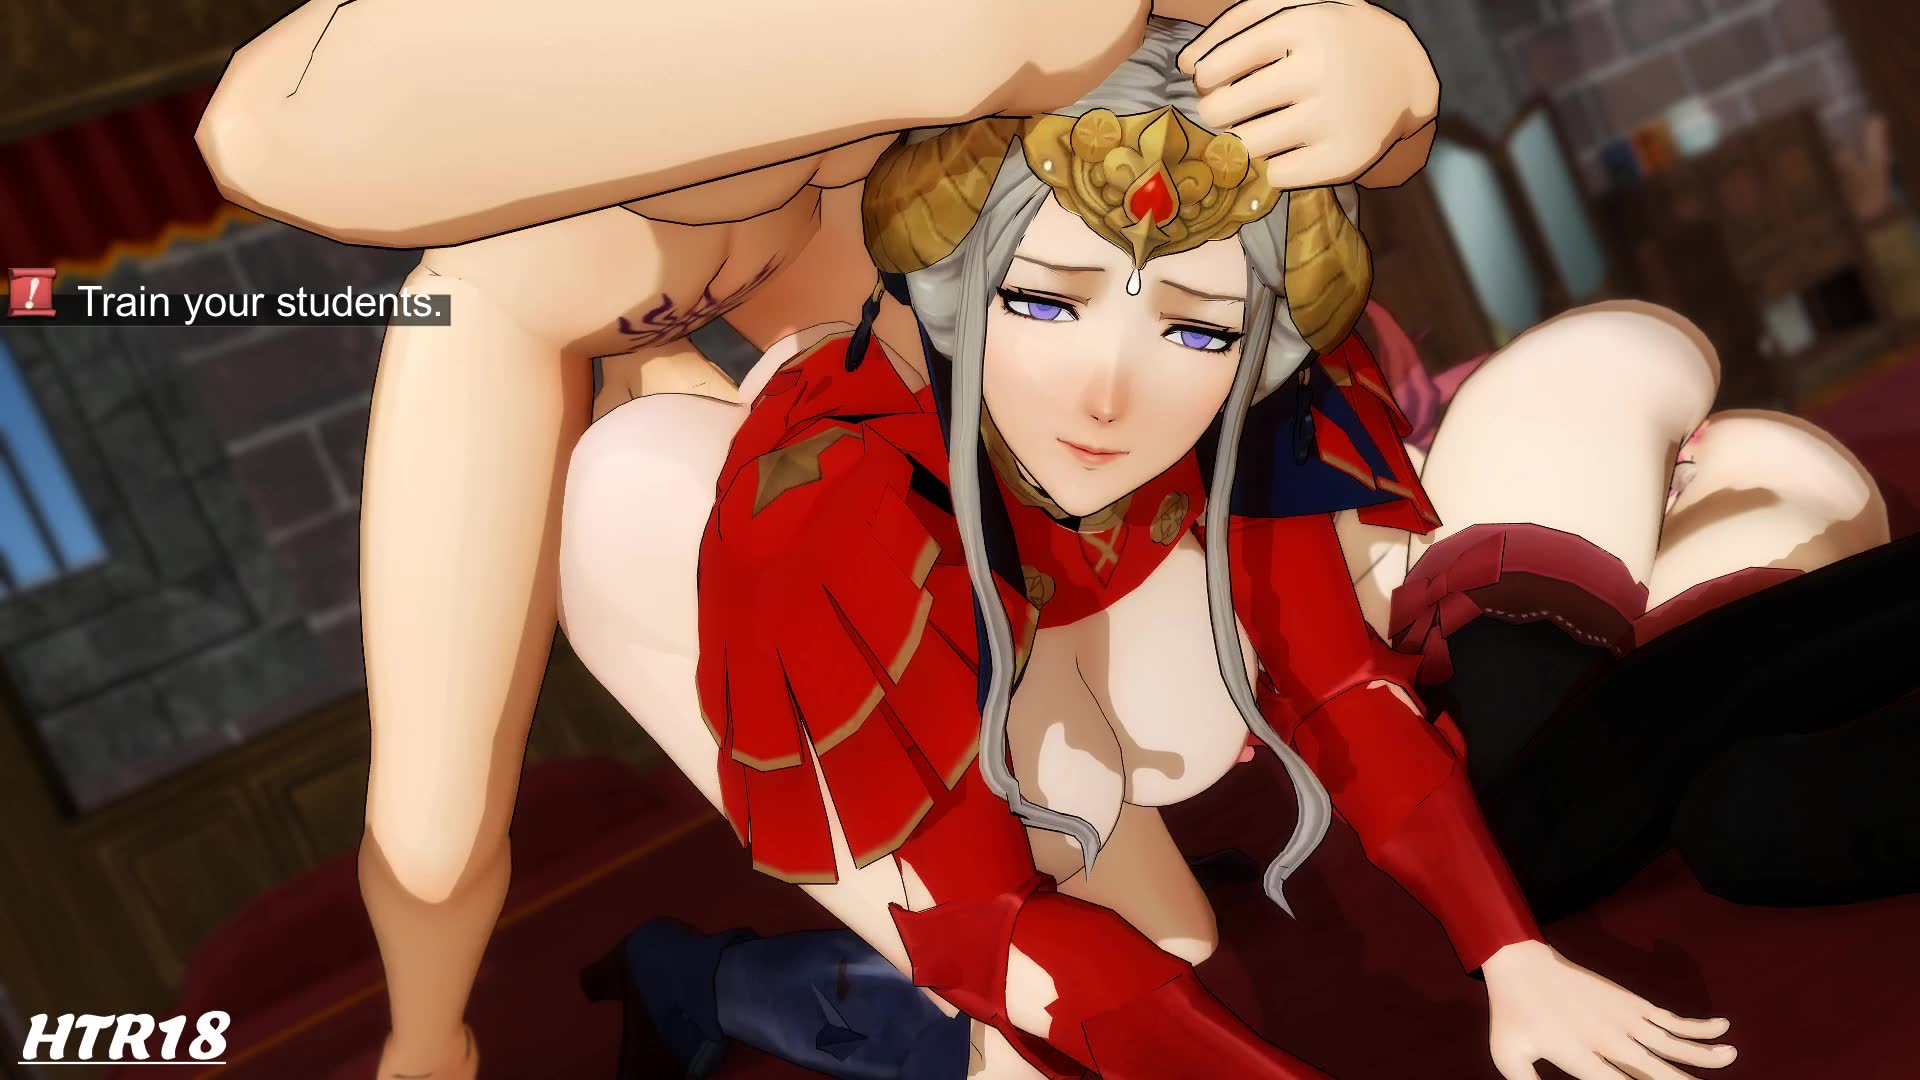 Edelgard Von Hresvelg gets fucked by Byleth in doggy style 1 – Fire Emblem NSFW animation thumbnail